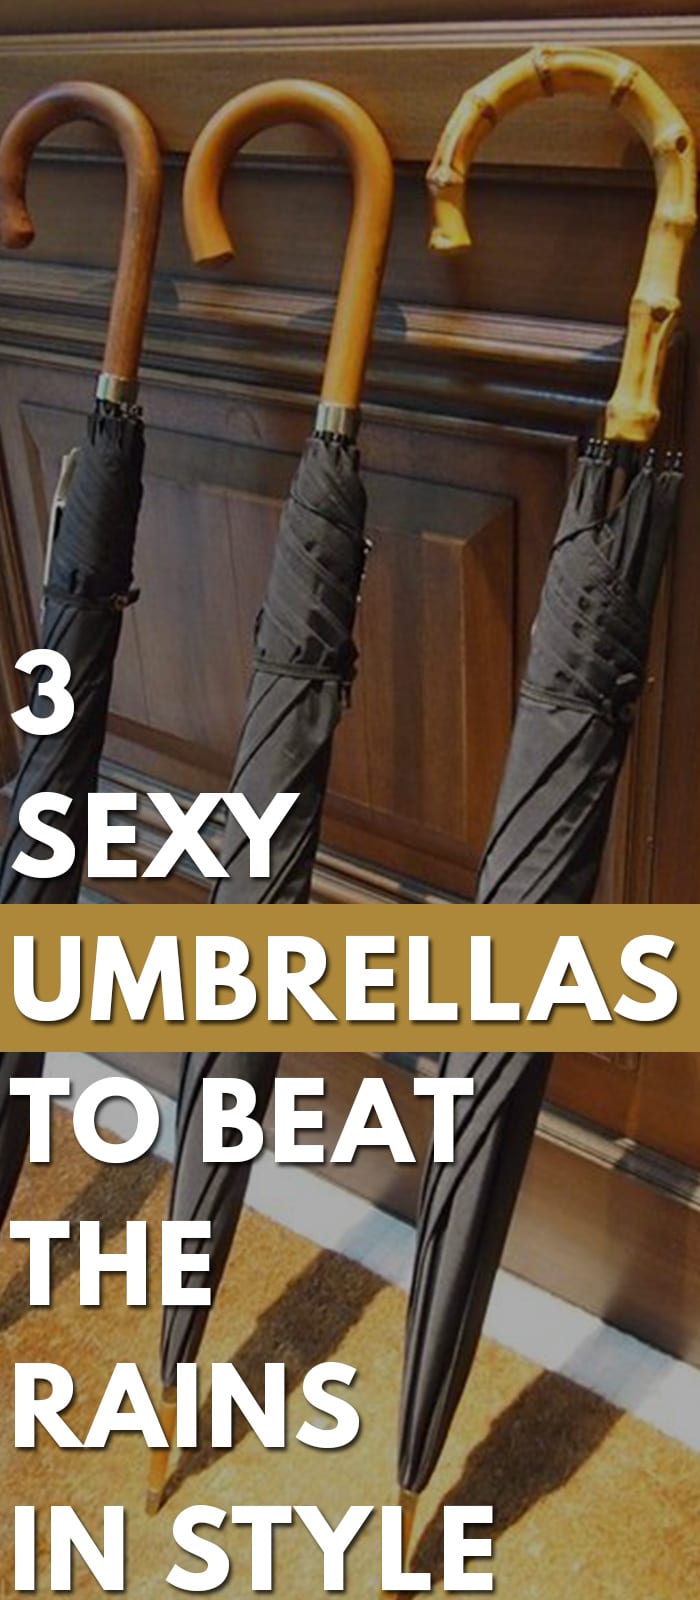 3-Sexy-Umbrellas-to-Beat-The-Rains-In-Style.......................